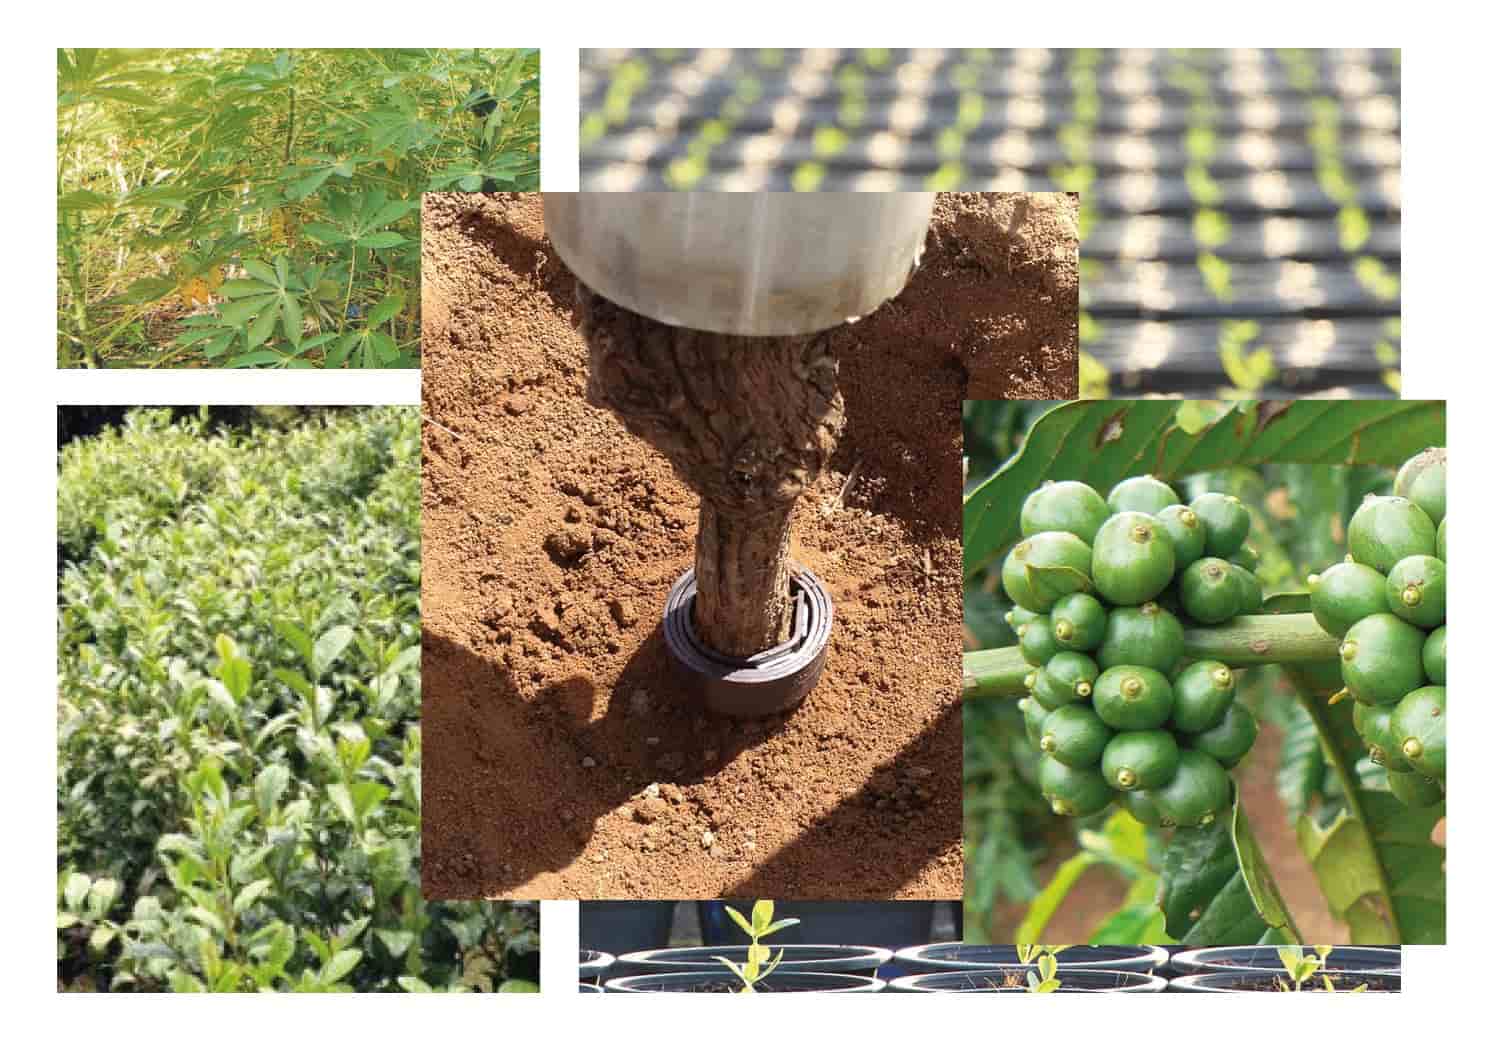 ECO streamz introduces streamz magnetic technology to commercial crops